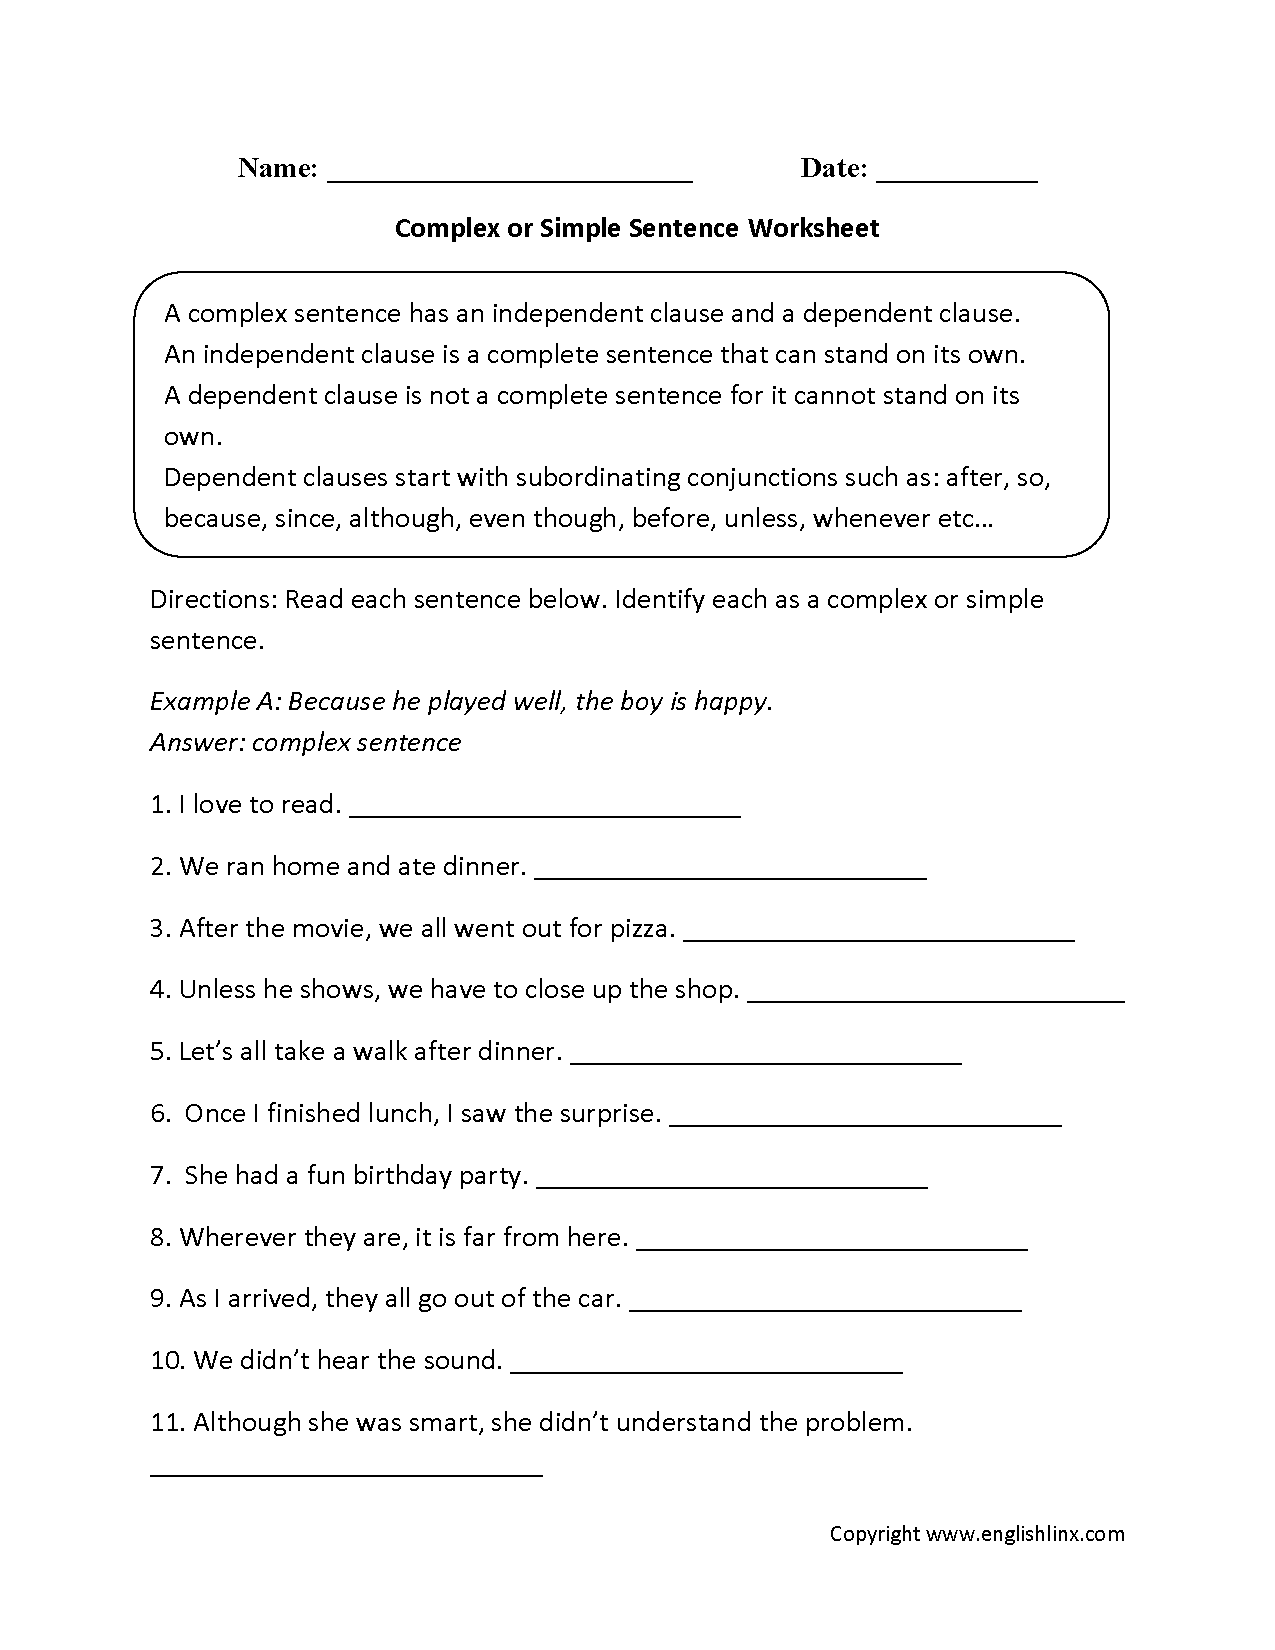 how-to-30-creative-complex-sentence-worksheets-4th-grade-simple-template-design